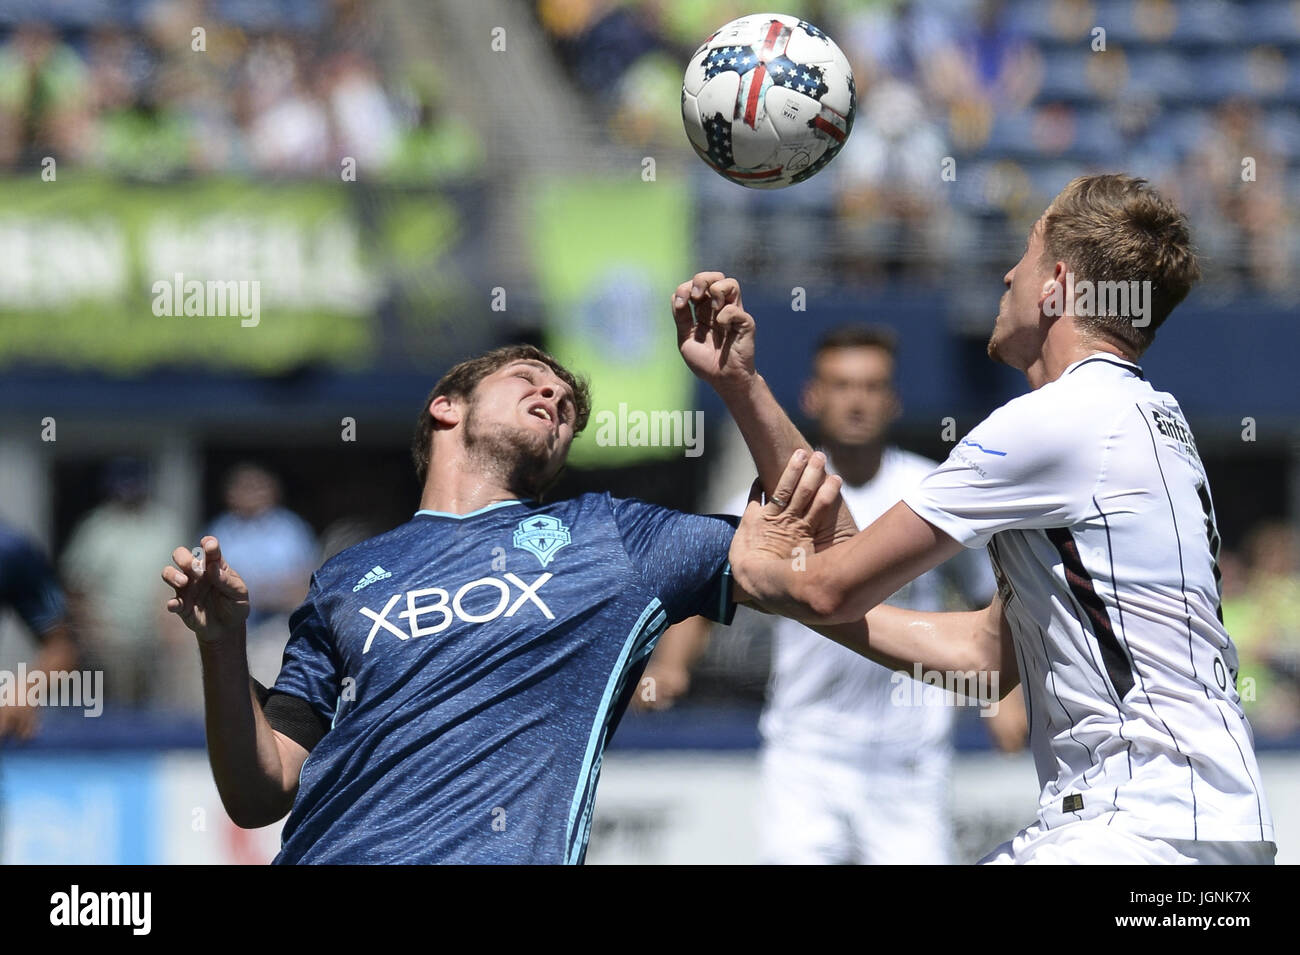 Seattle, Washington, USA. 8th July, 2017. Soccer 2017: BASTIAN OCZIPKA (6) and ZACH MATHERS (32) battle for the ball as Eintracht Frankfurt visits the Seattle Sounders for an International friendly match at Century Link Field in Seattle. Credit: Jeff Halstead/ZUMA Wire/Alamy Live News Stock Photo